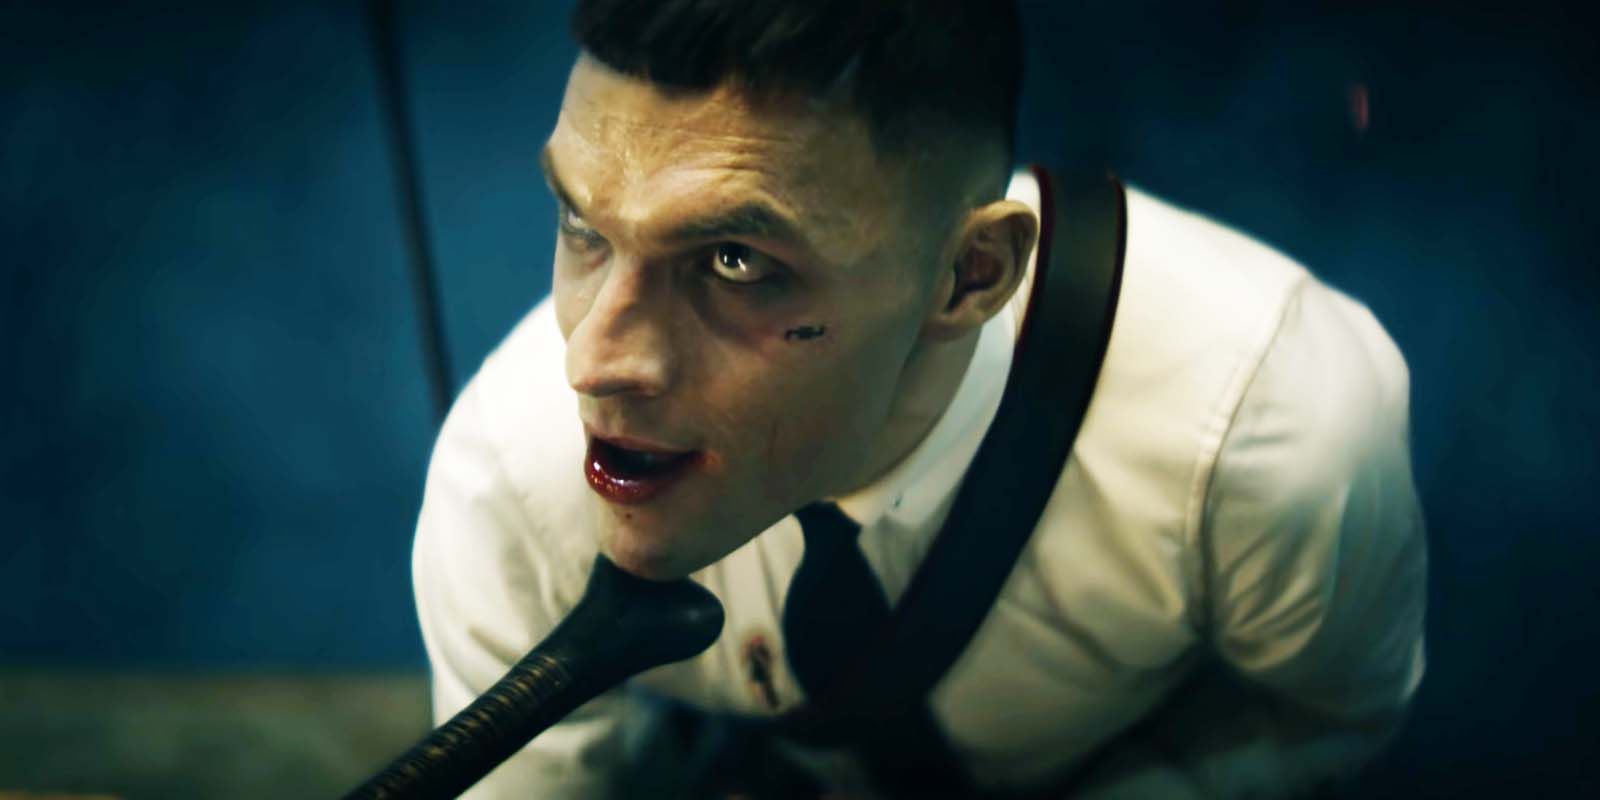 Ed Skrein appears on the verge of defeat as Atticus Noble in Rebel Moon - Part One A Child of Fire